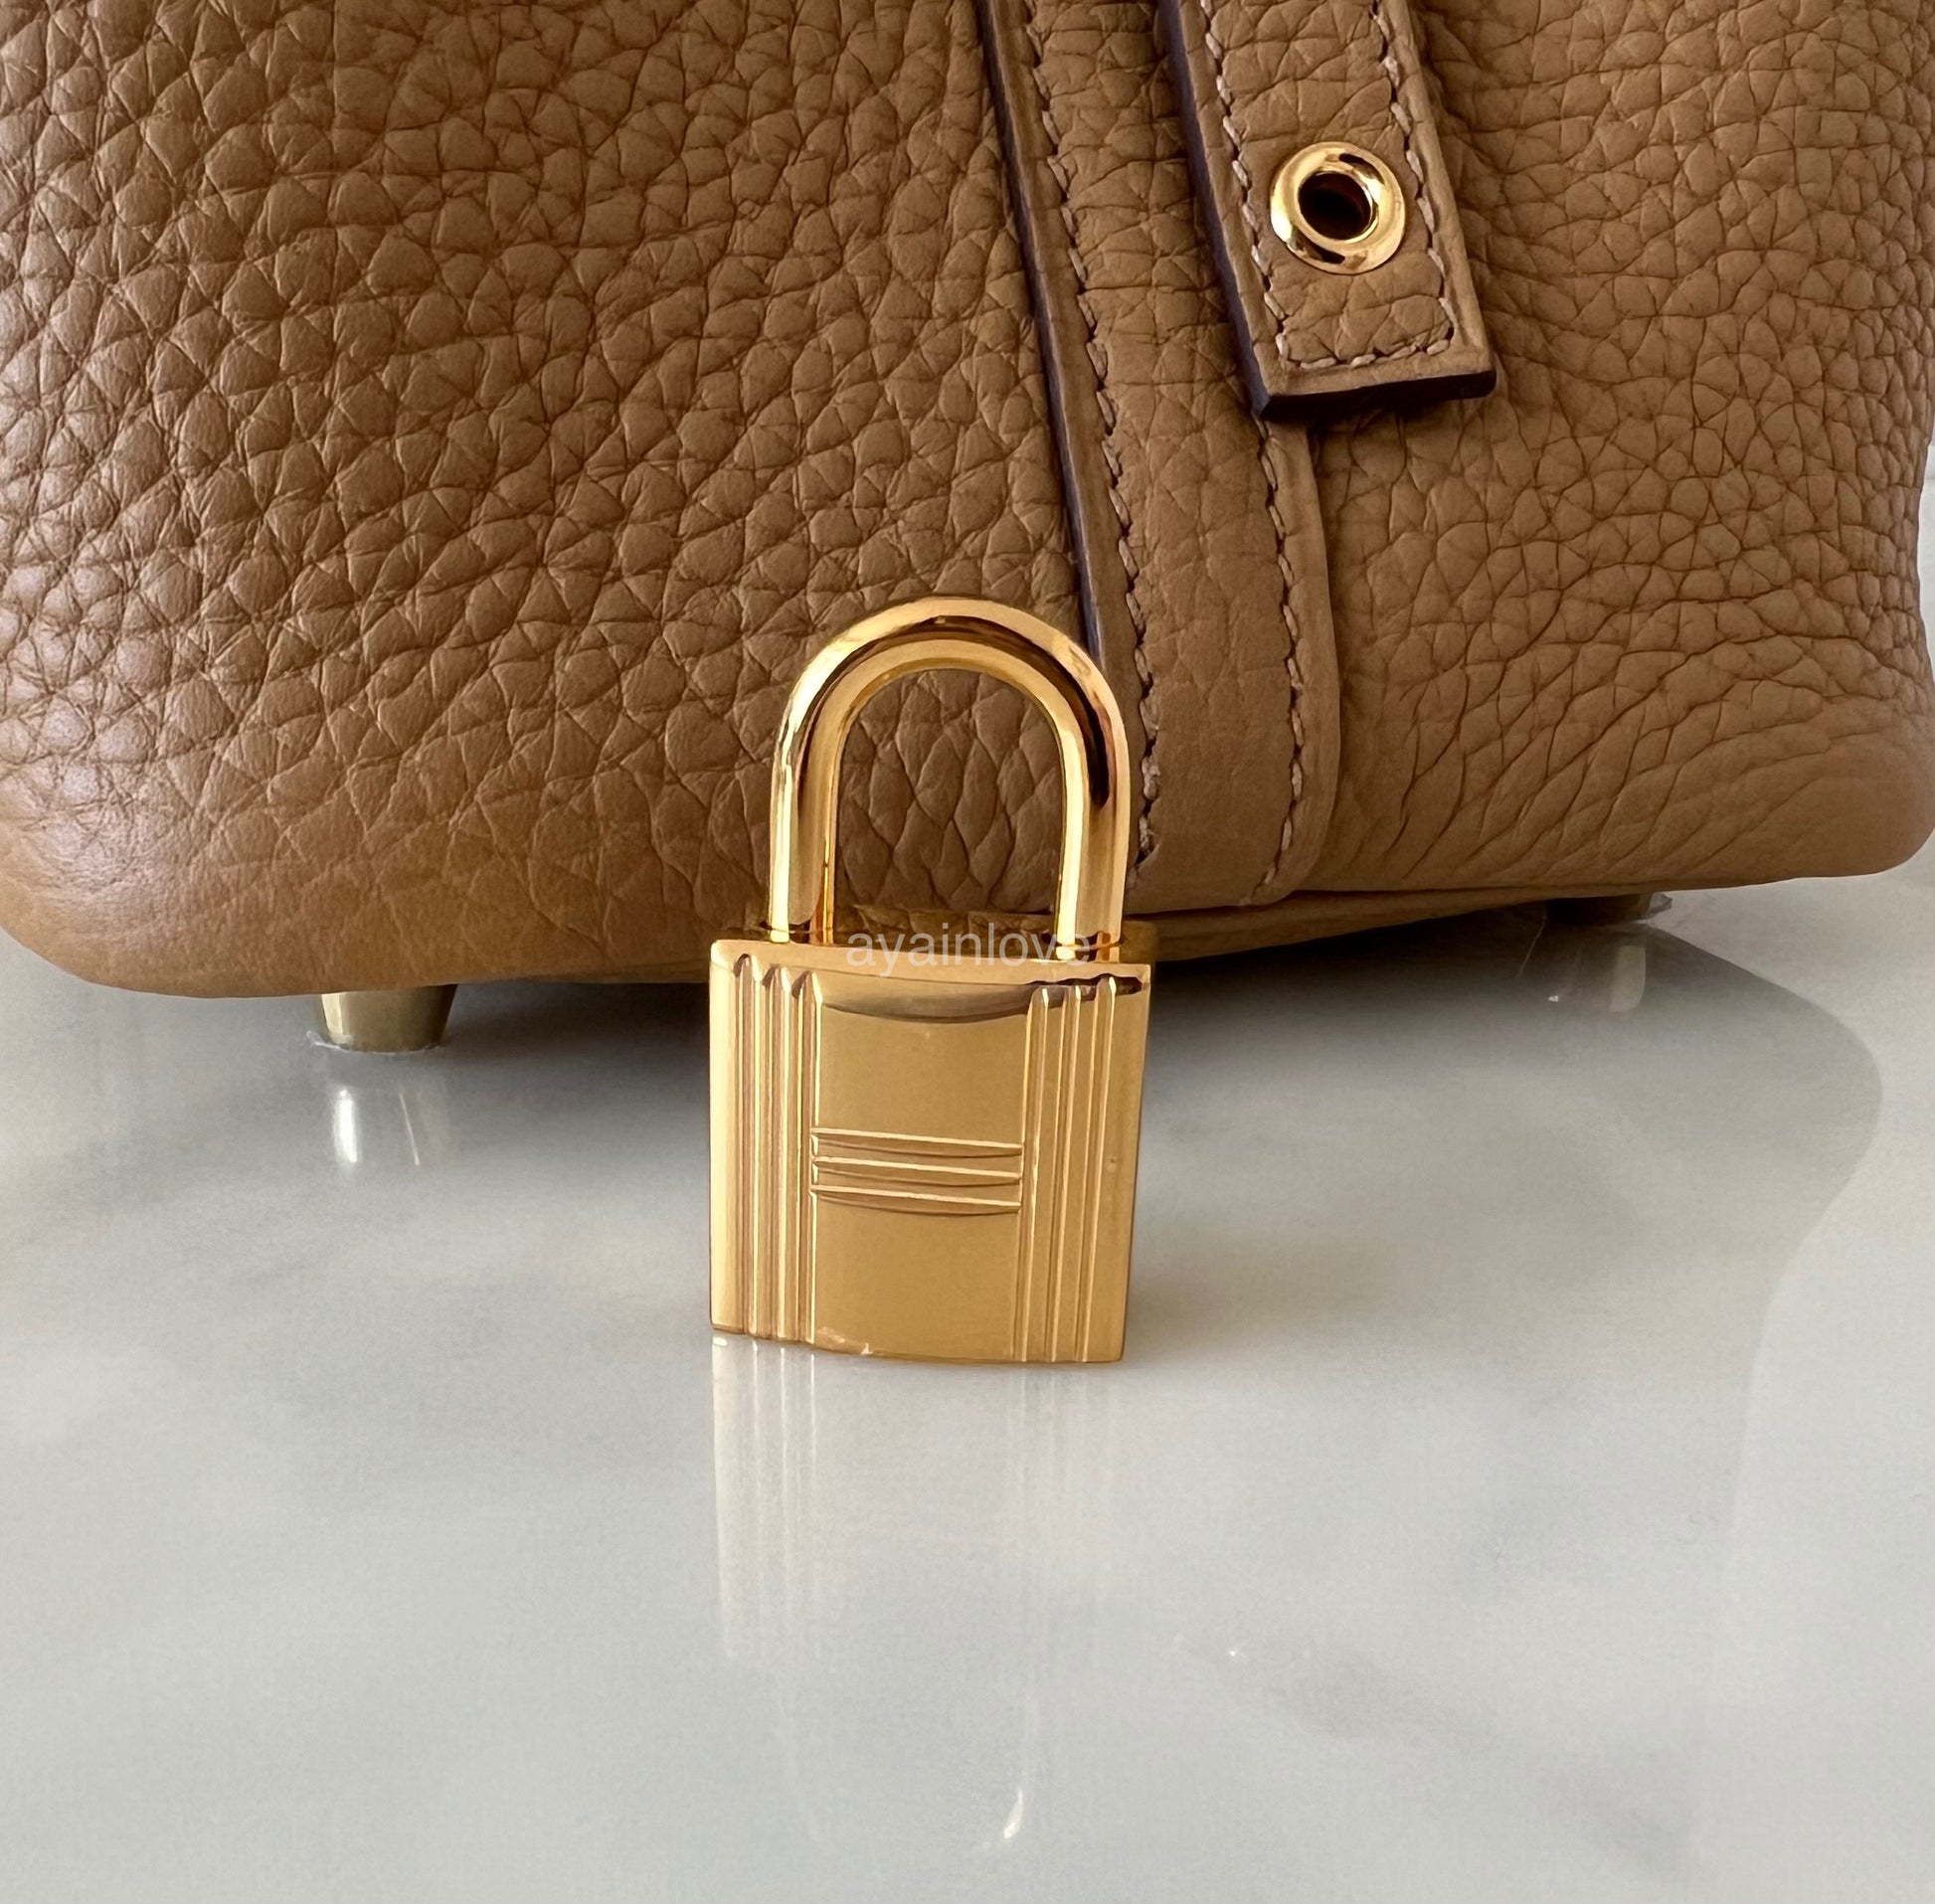 HERMES Taurillon Clemence Picotin Lock 18 PM Biscuit 1077869